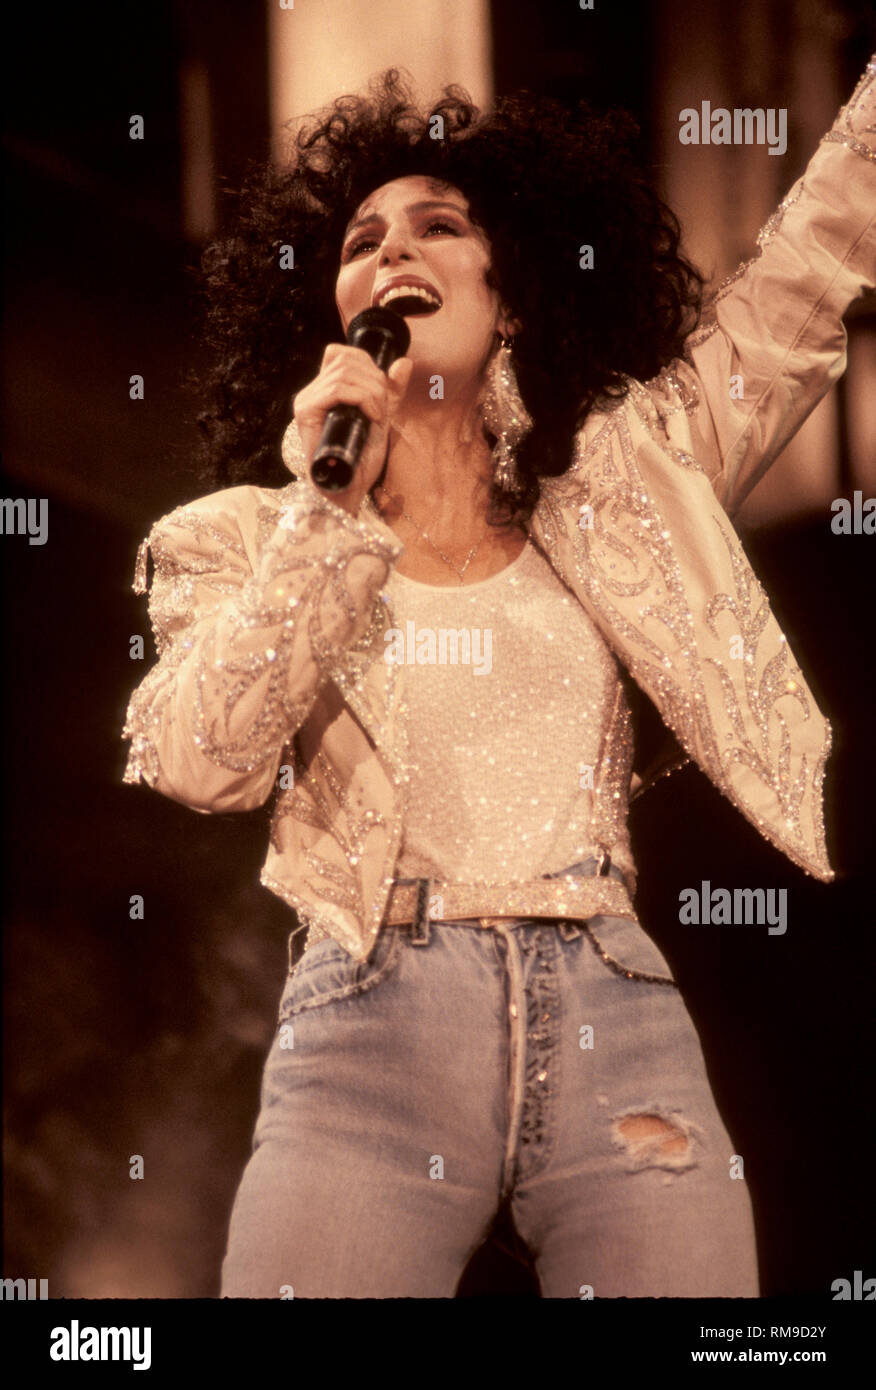 Singer, songwriter, actress and movie producer Cher, born Cherilyn Sarkisian, is shown on stage performing during a 'live' concert appearance. Stock Photo